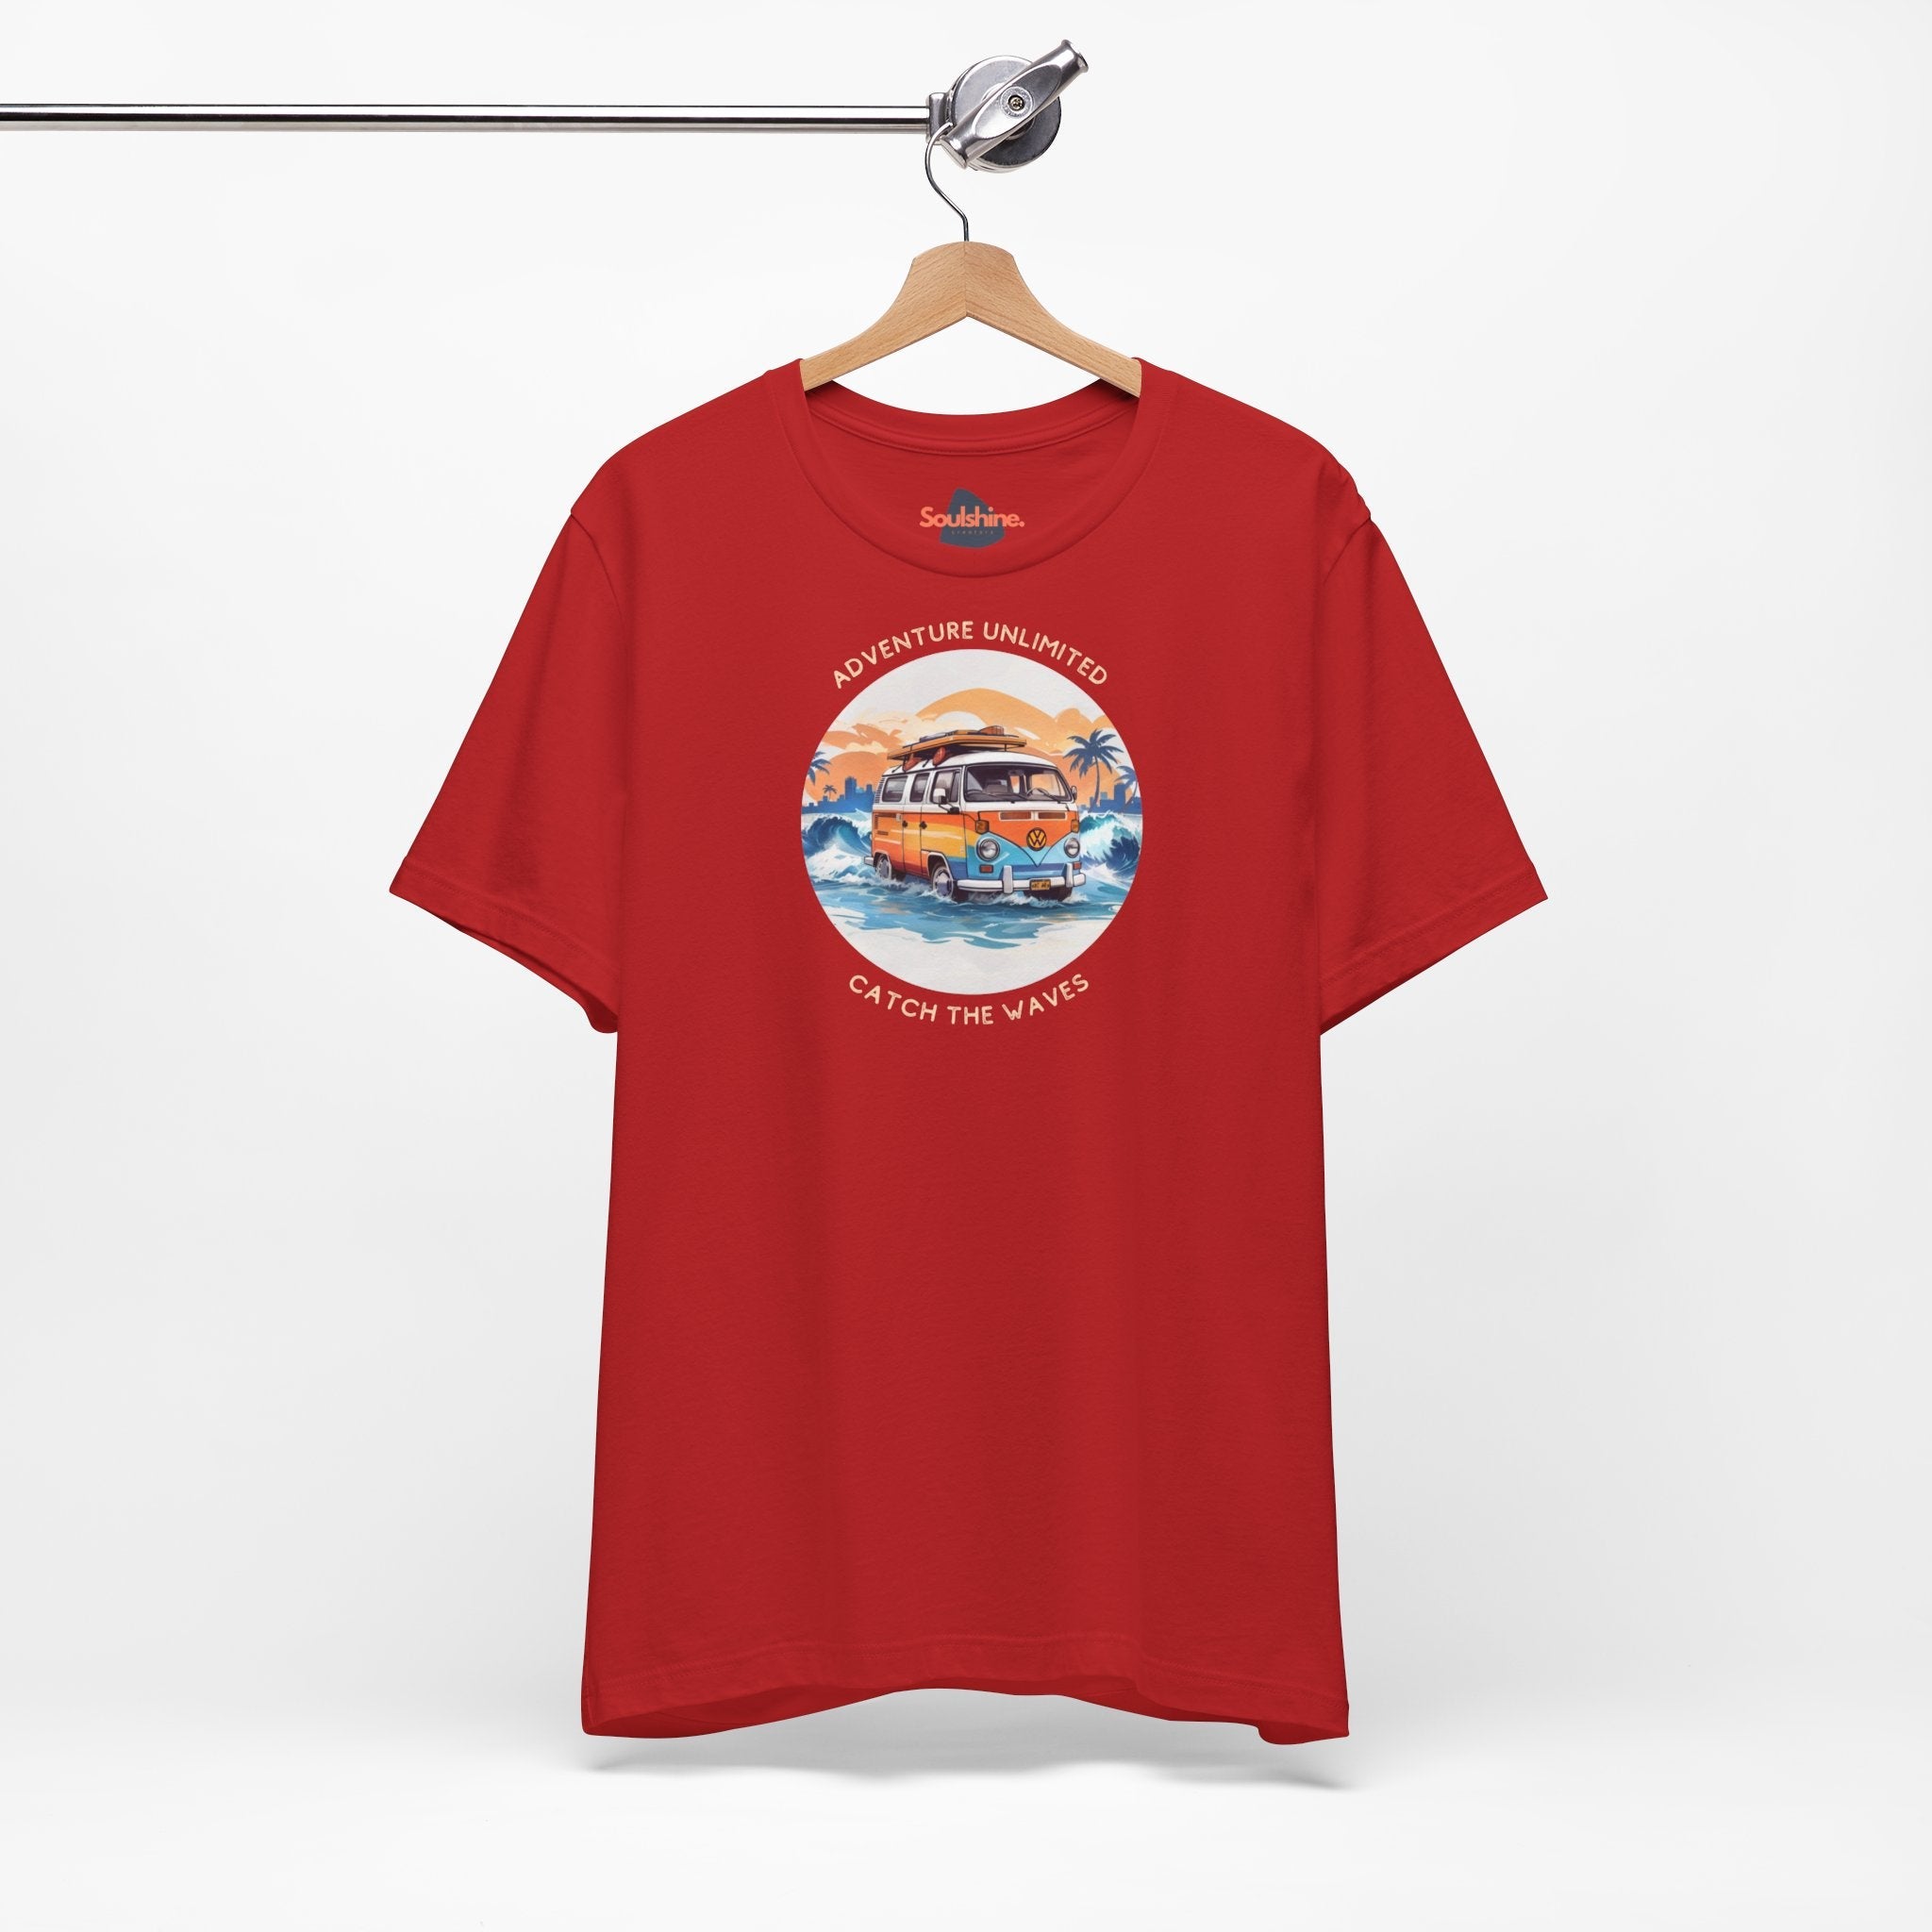 Direct-to-garment printed red t-shirt with ’Adventure Unlimited - Surfing T-Shirt’ design on it